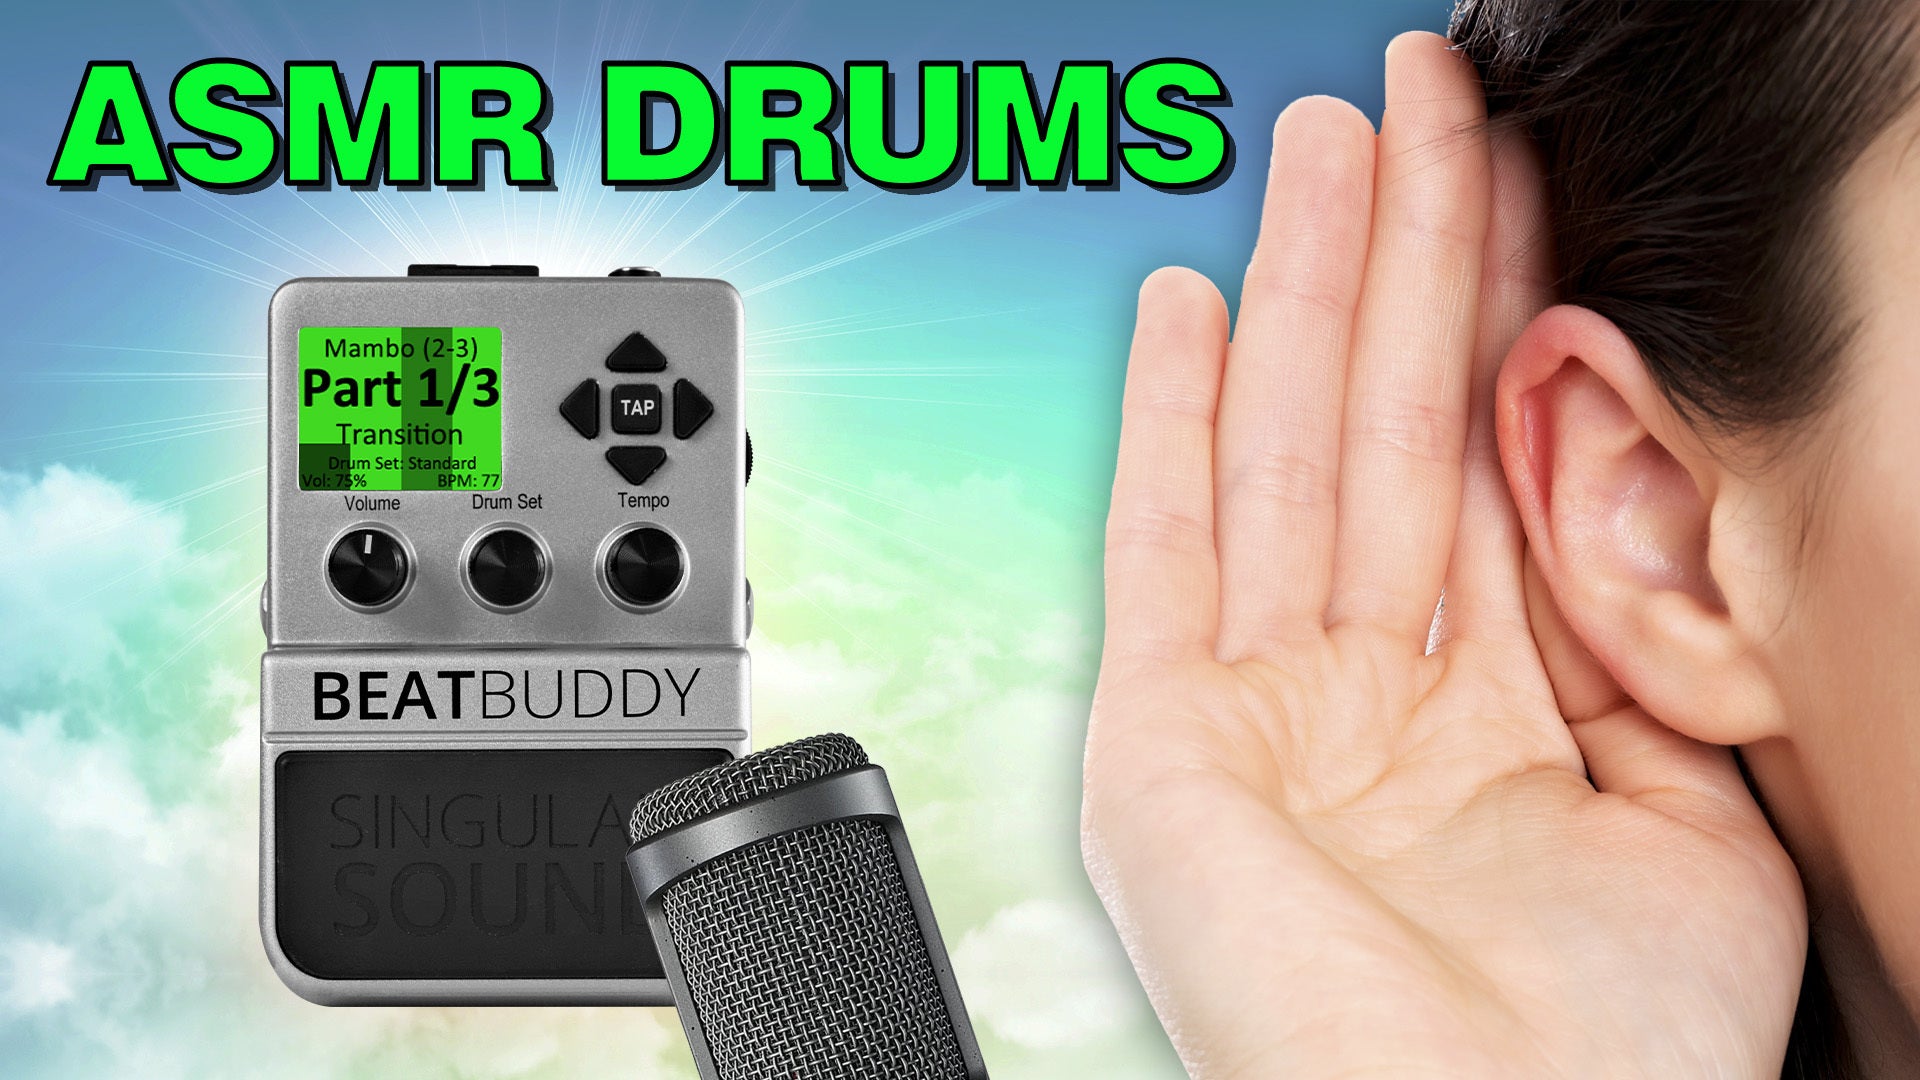 Crinkles, Taps, and Pen Clicks: We Made an ASMR Drum Set for the BeatBuddy